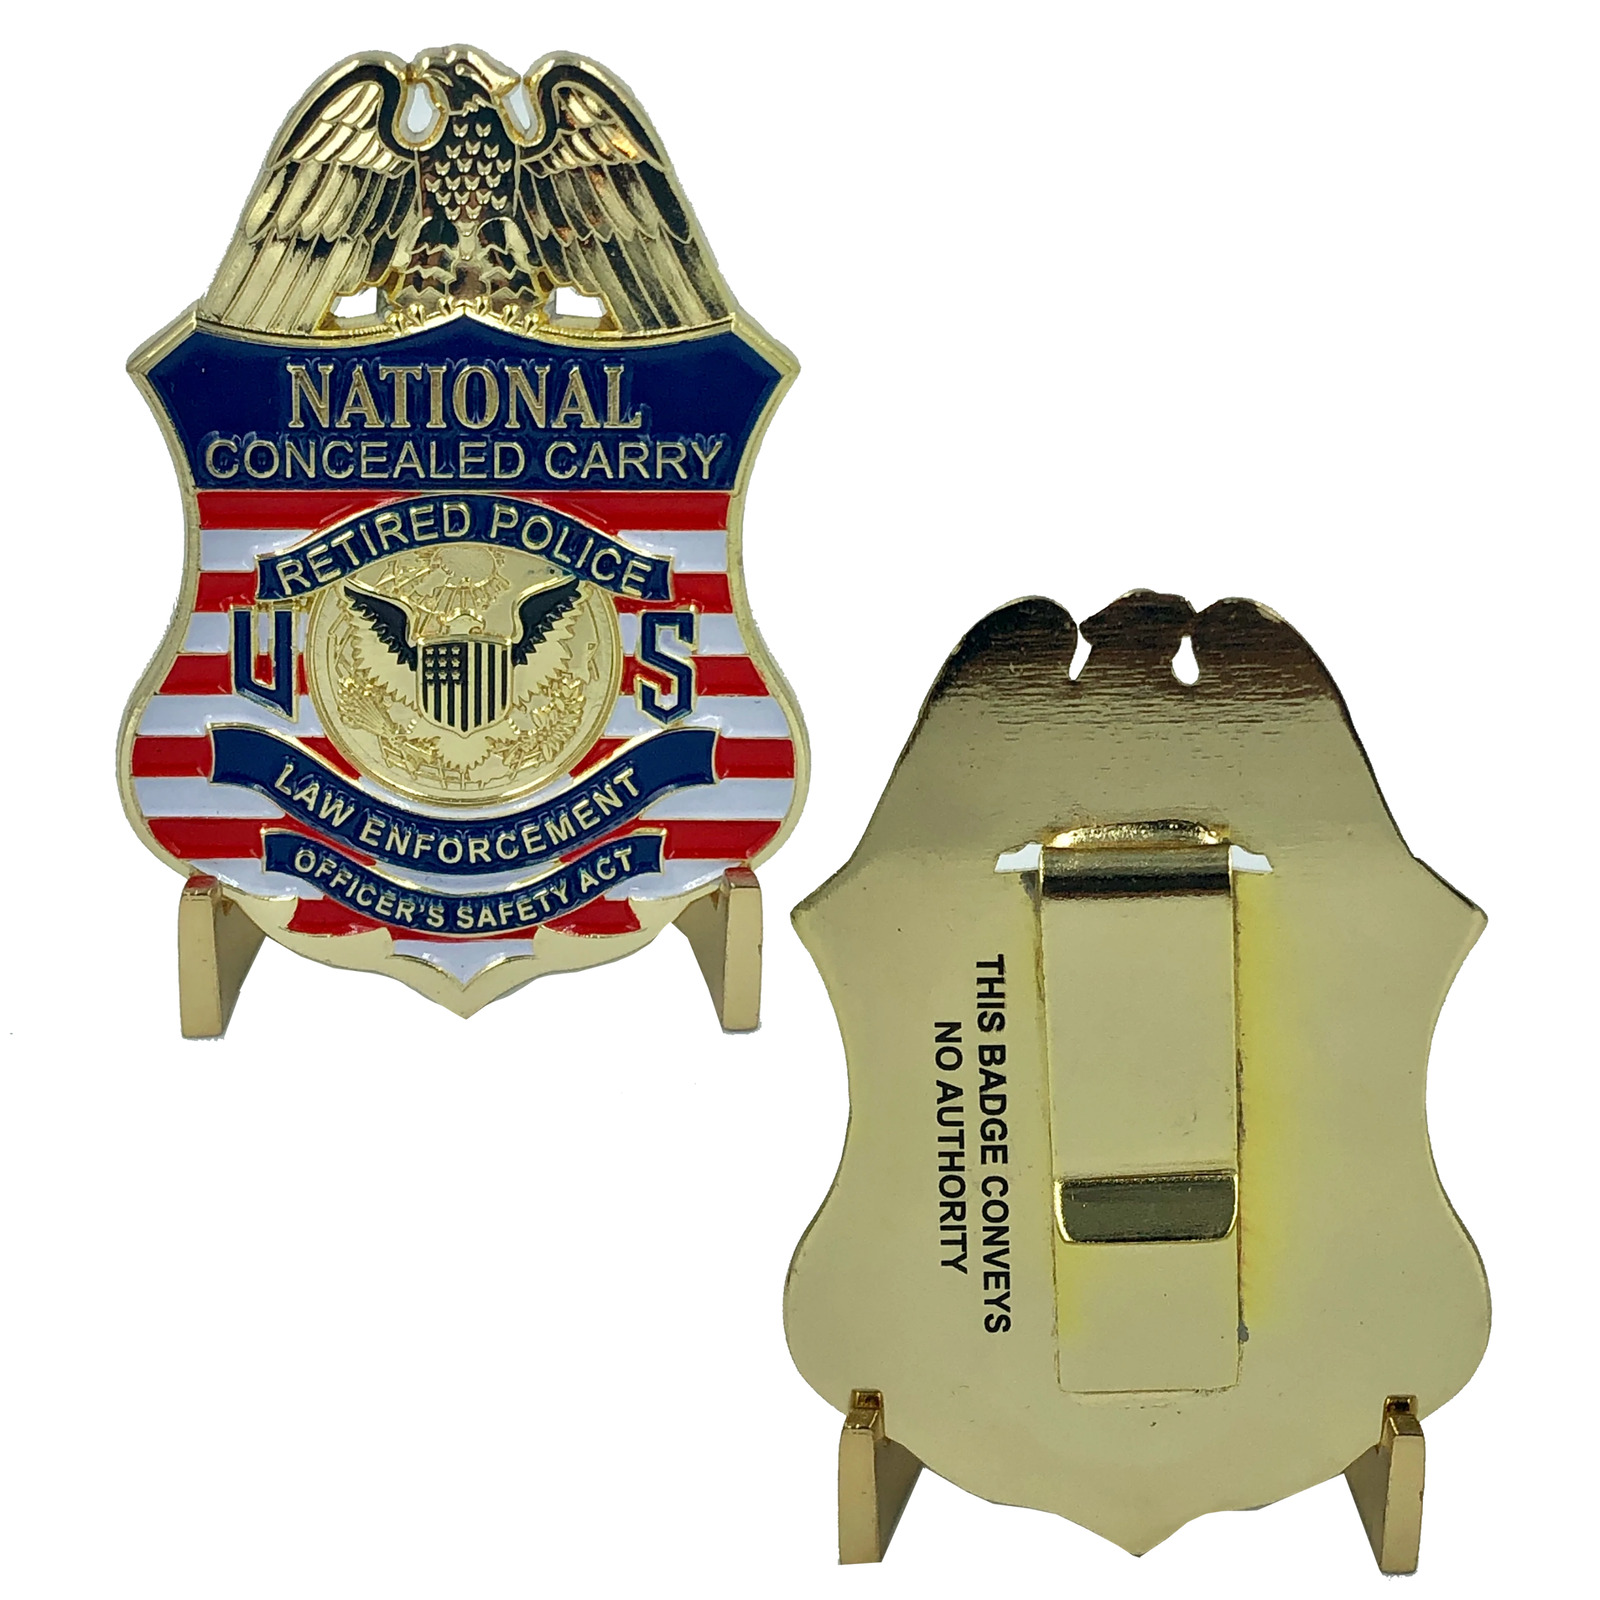 F-019 National Concealed Carry Retired Police LEOSA